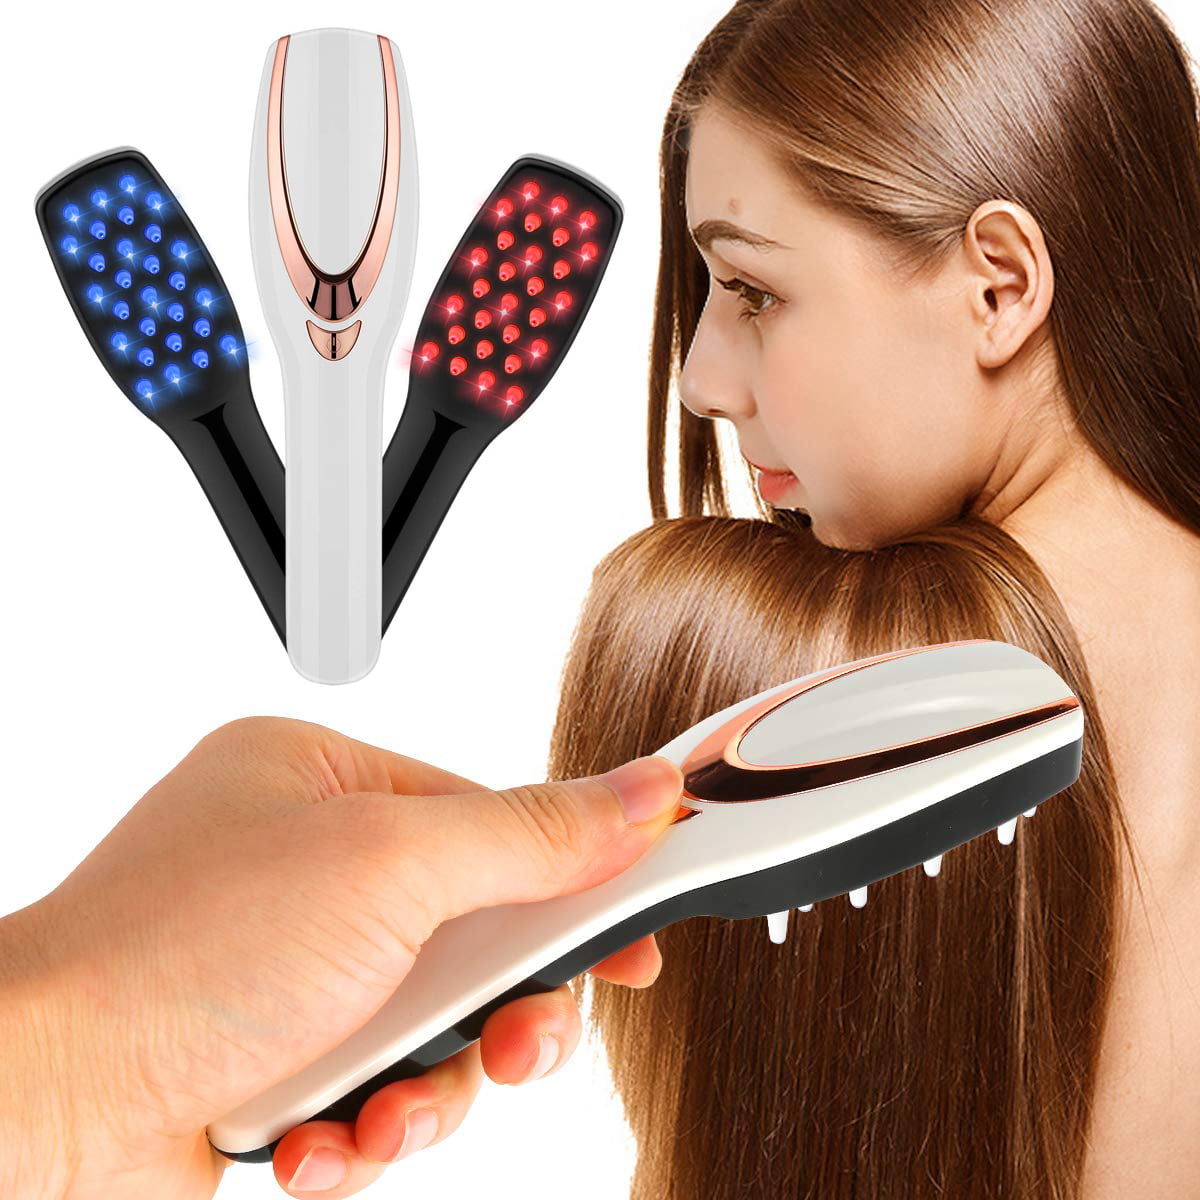 Reactionnx 3 In 1 Phototherapy Scalp Massager Comb For Hair Growth